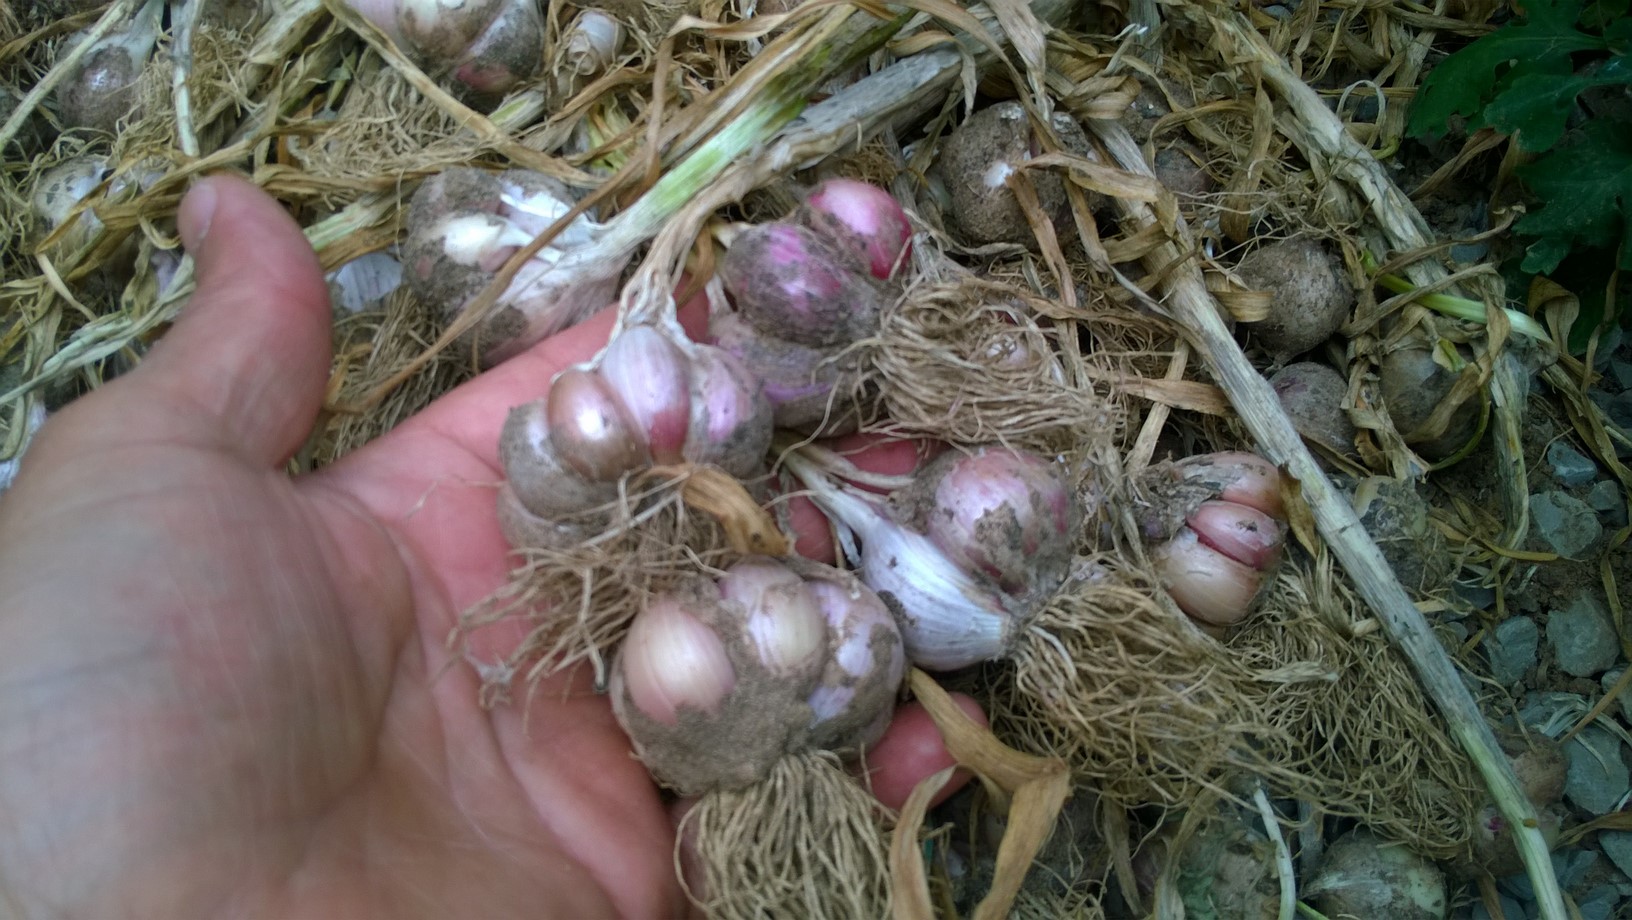 Plant garlic in the Fall. September and October are the best months to plant, it should be at least two weeks before your first frost of the season. This affords your garlic the best possible chances to withstand Winter conditions by giving it ample time to establish